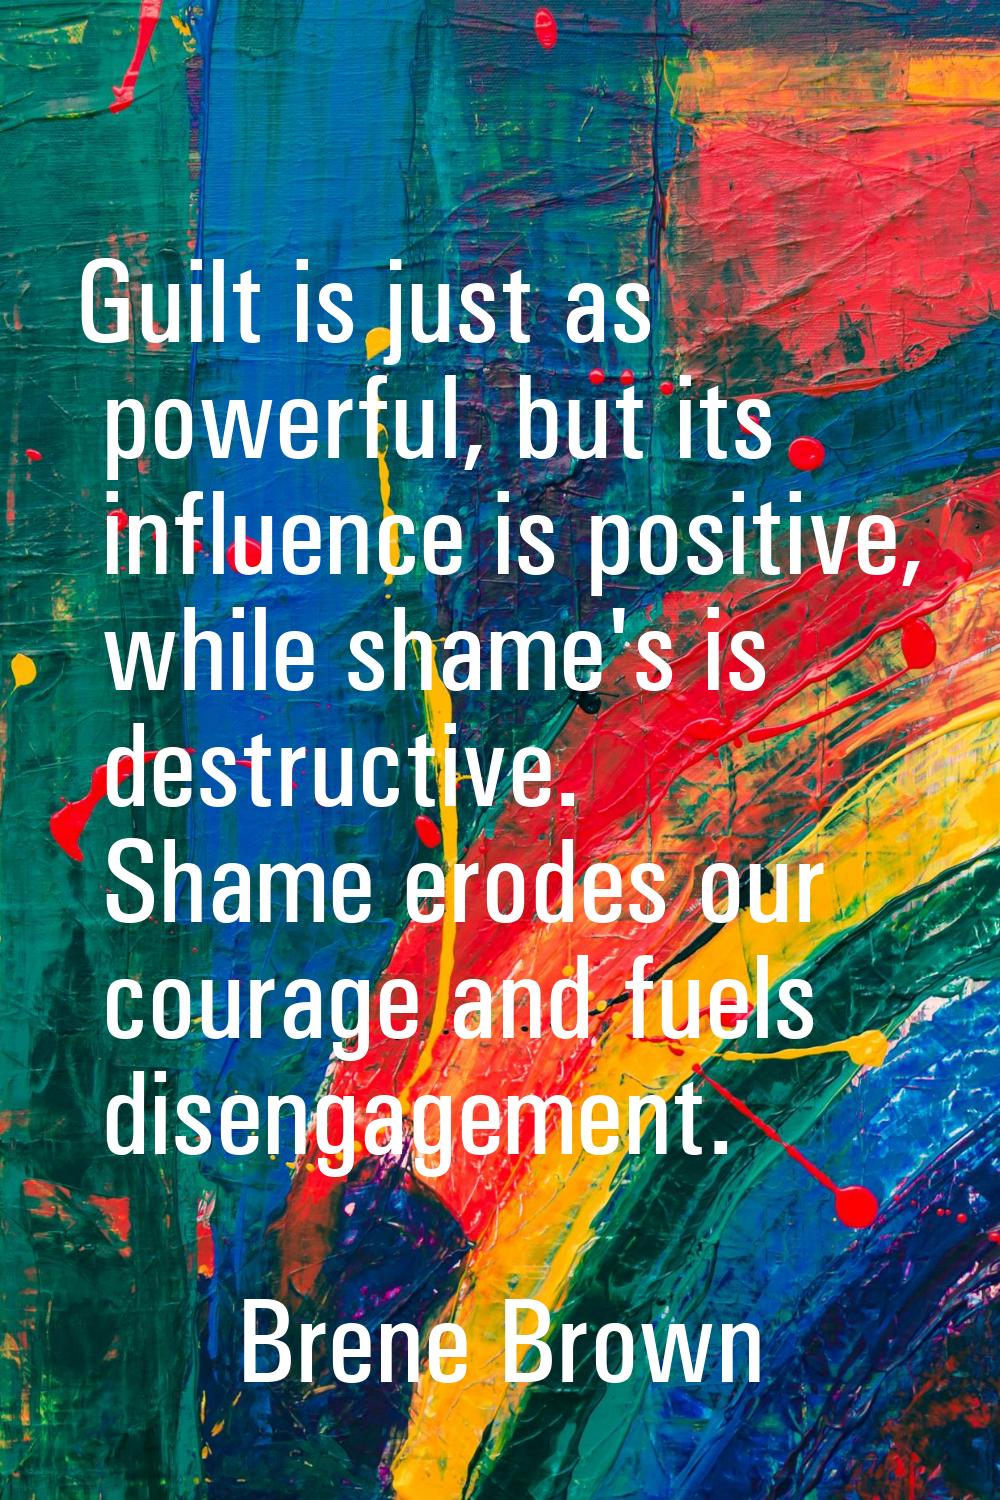 Guilt is just as powerful, but its influence is positive, while shame's is destructive. Shame erode